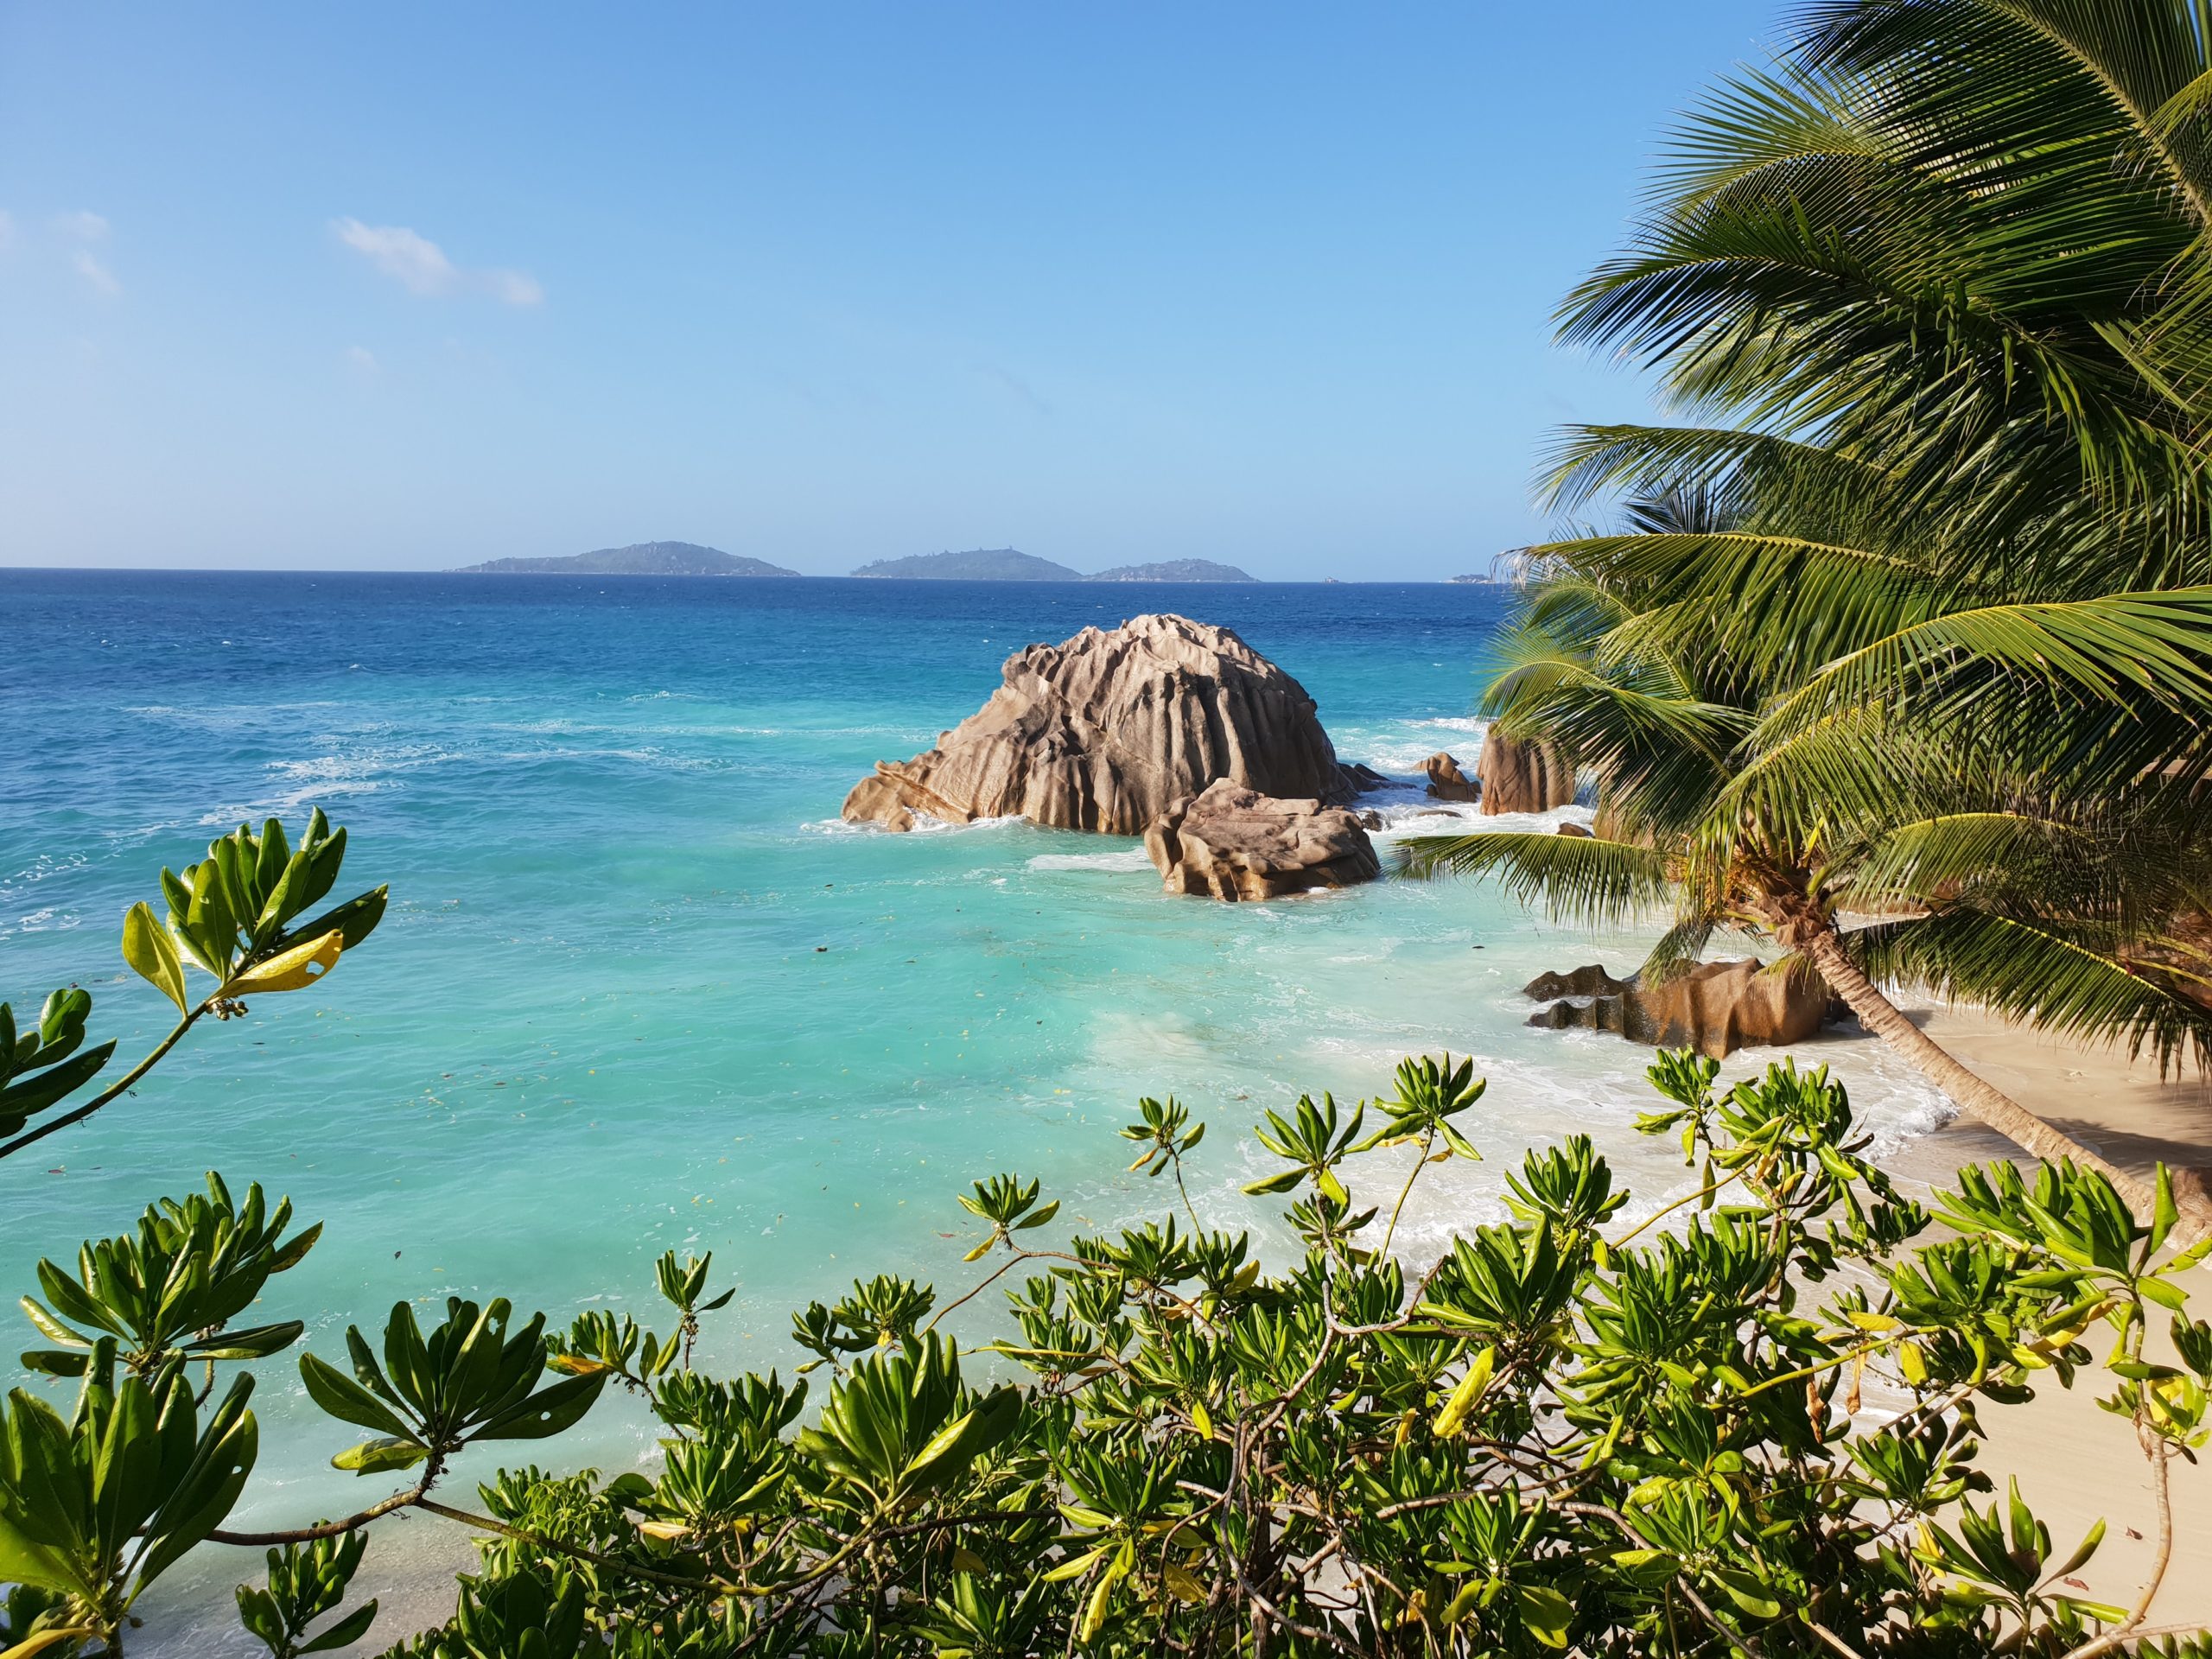 A view of a large granite out crop off of the shore of a Seychelles island